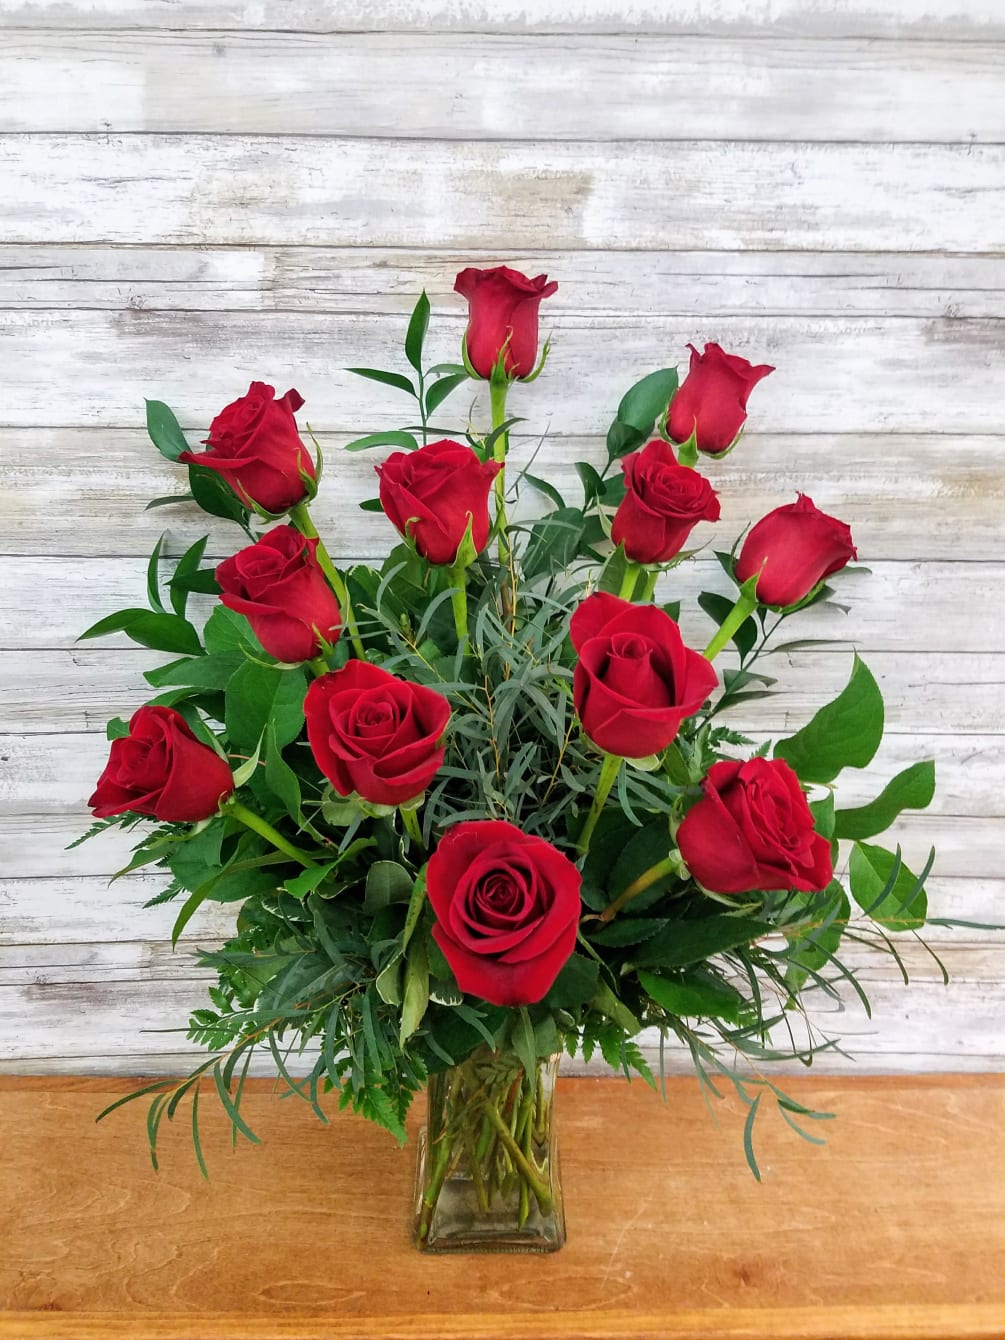 A Classic Arrangement for Any Occasion. 
12 premium long stem red roses